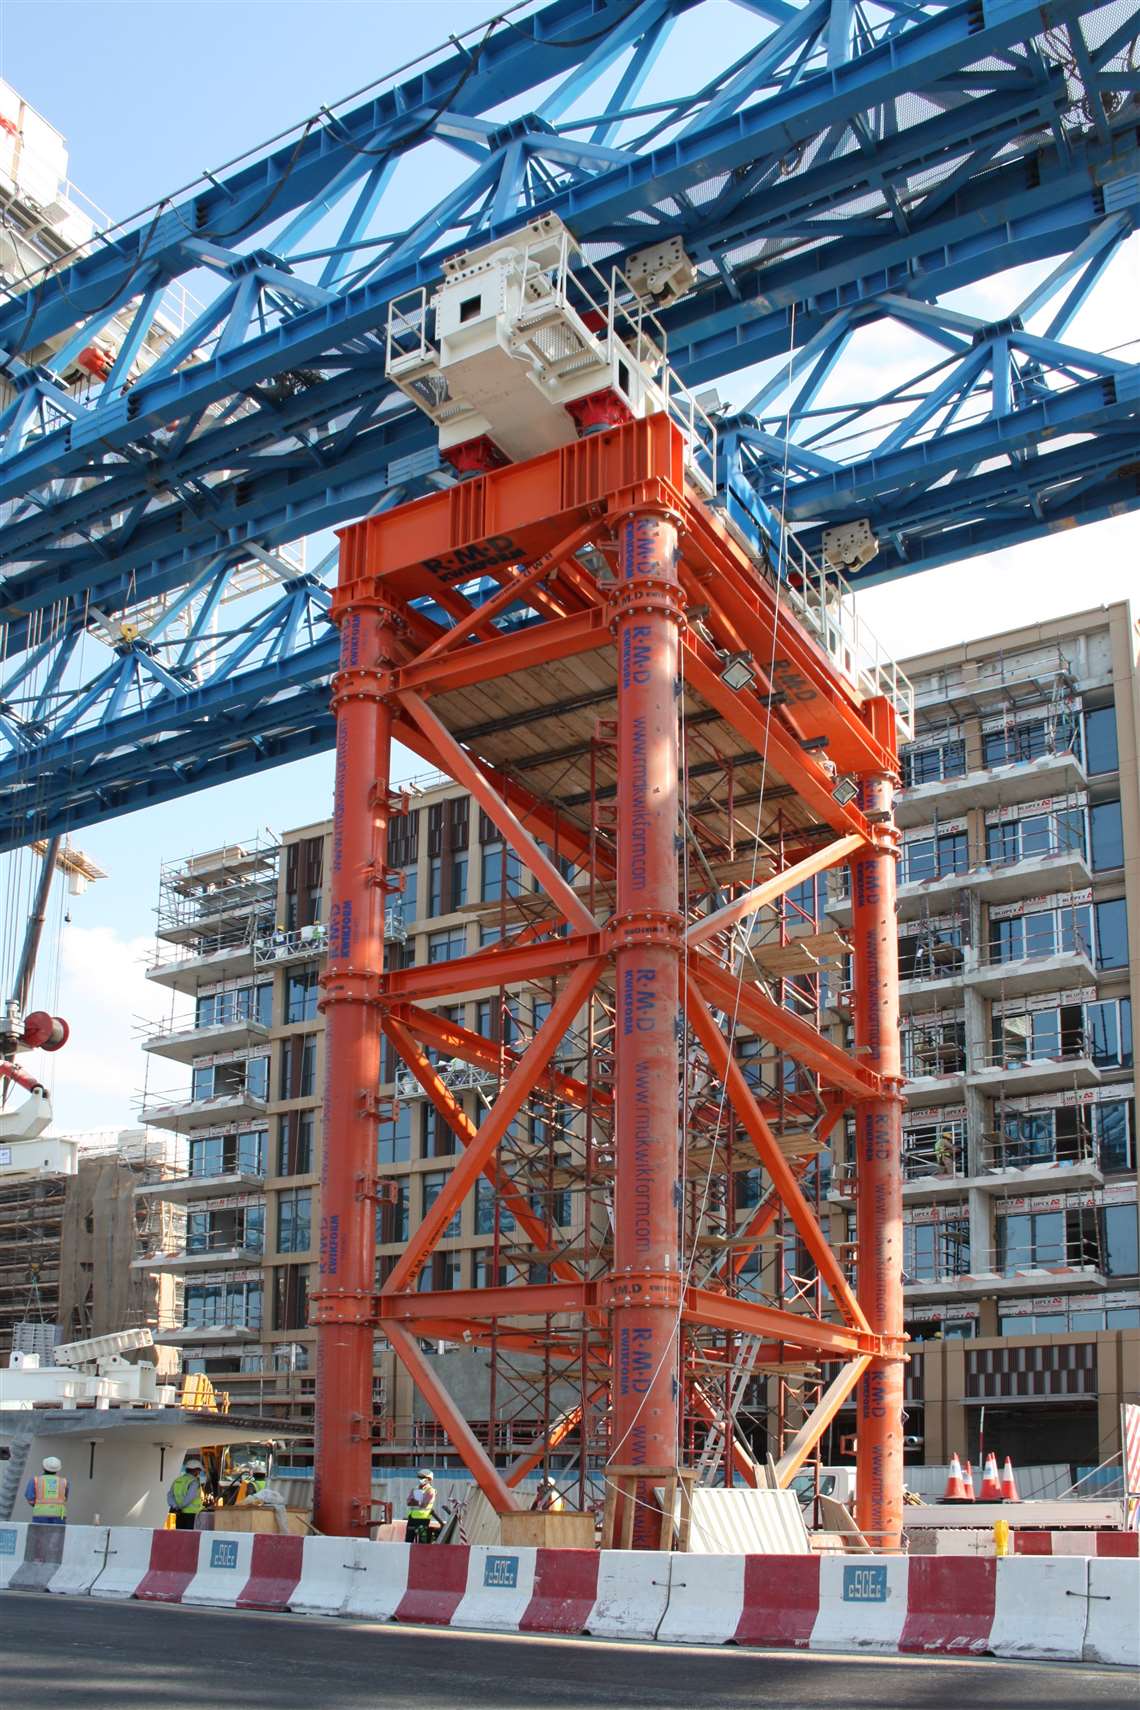 One of RMD Kwikform's shoring access towers